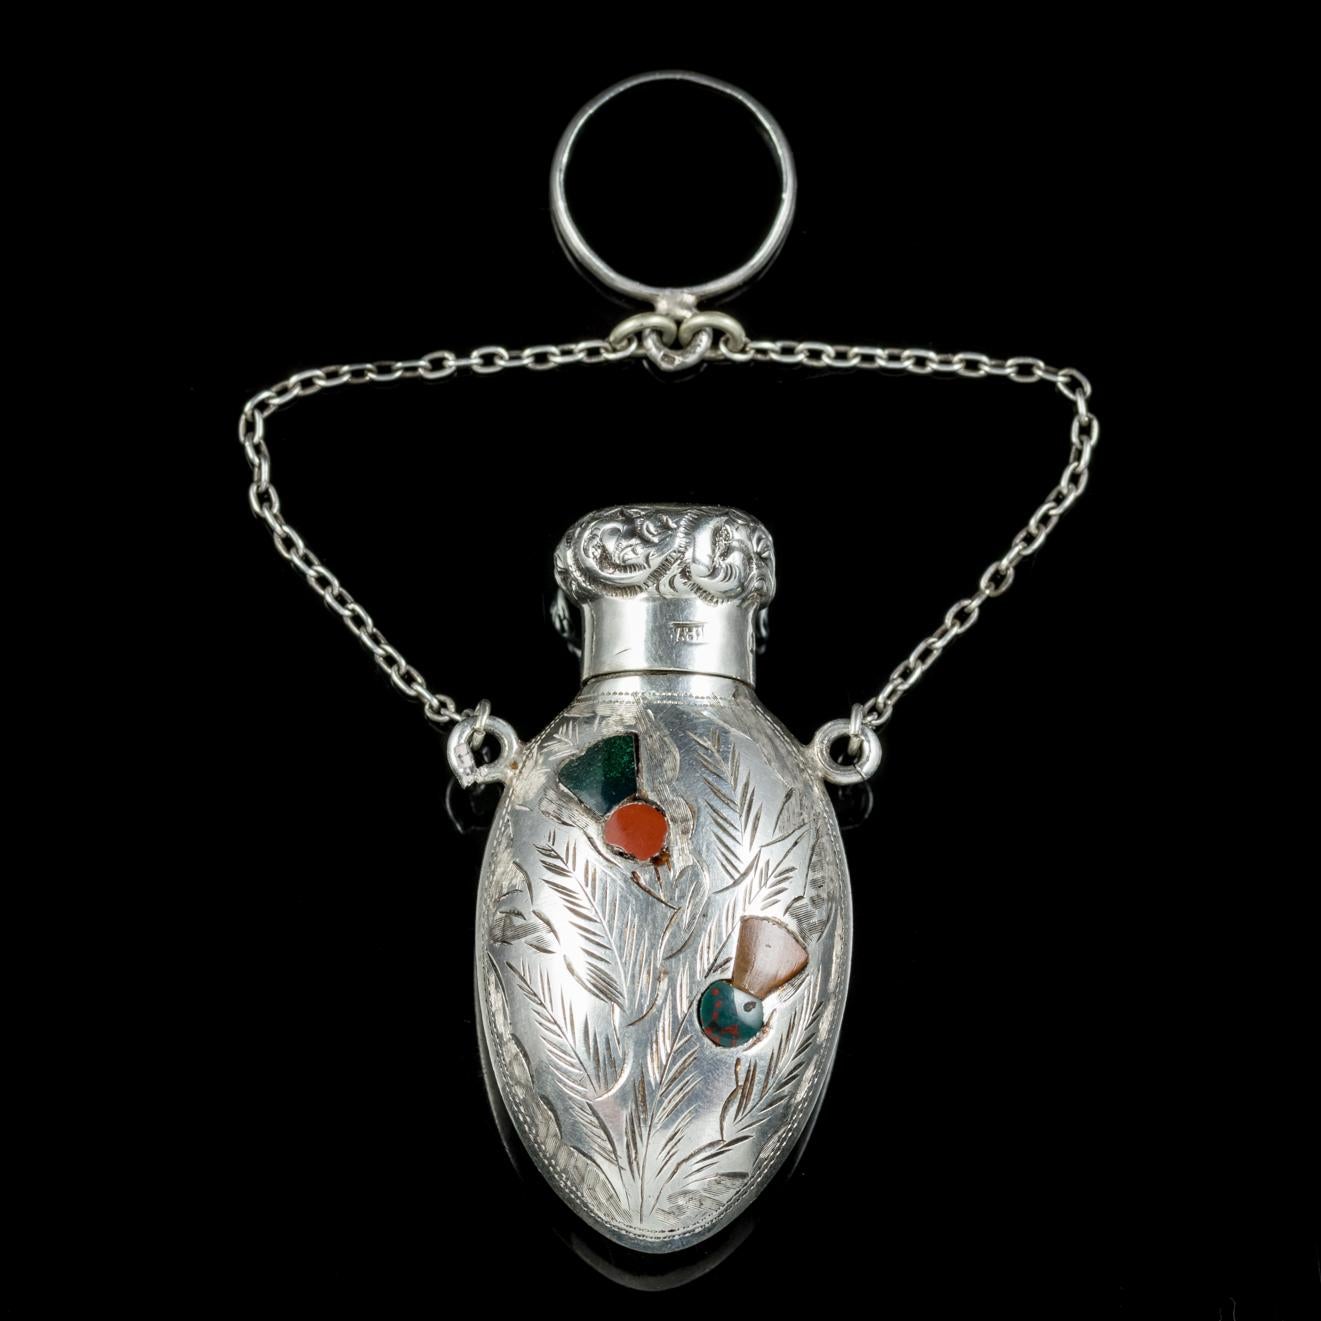 This fabulous antique Victorian Scottish perfume bottle pendant is hallmarked Birmingham 1878. 

Perfume bottle jewellery gained in popularity during the Victorian era and were used to hide a small vile of perfume inside for the wearer to use when